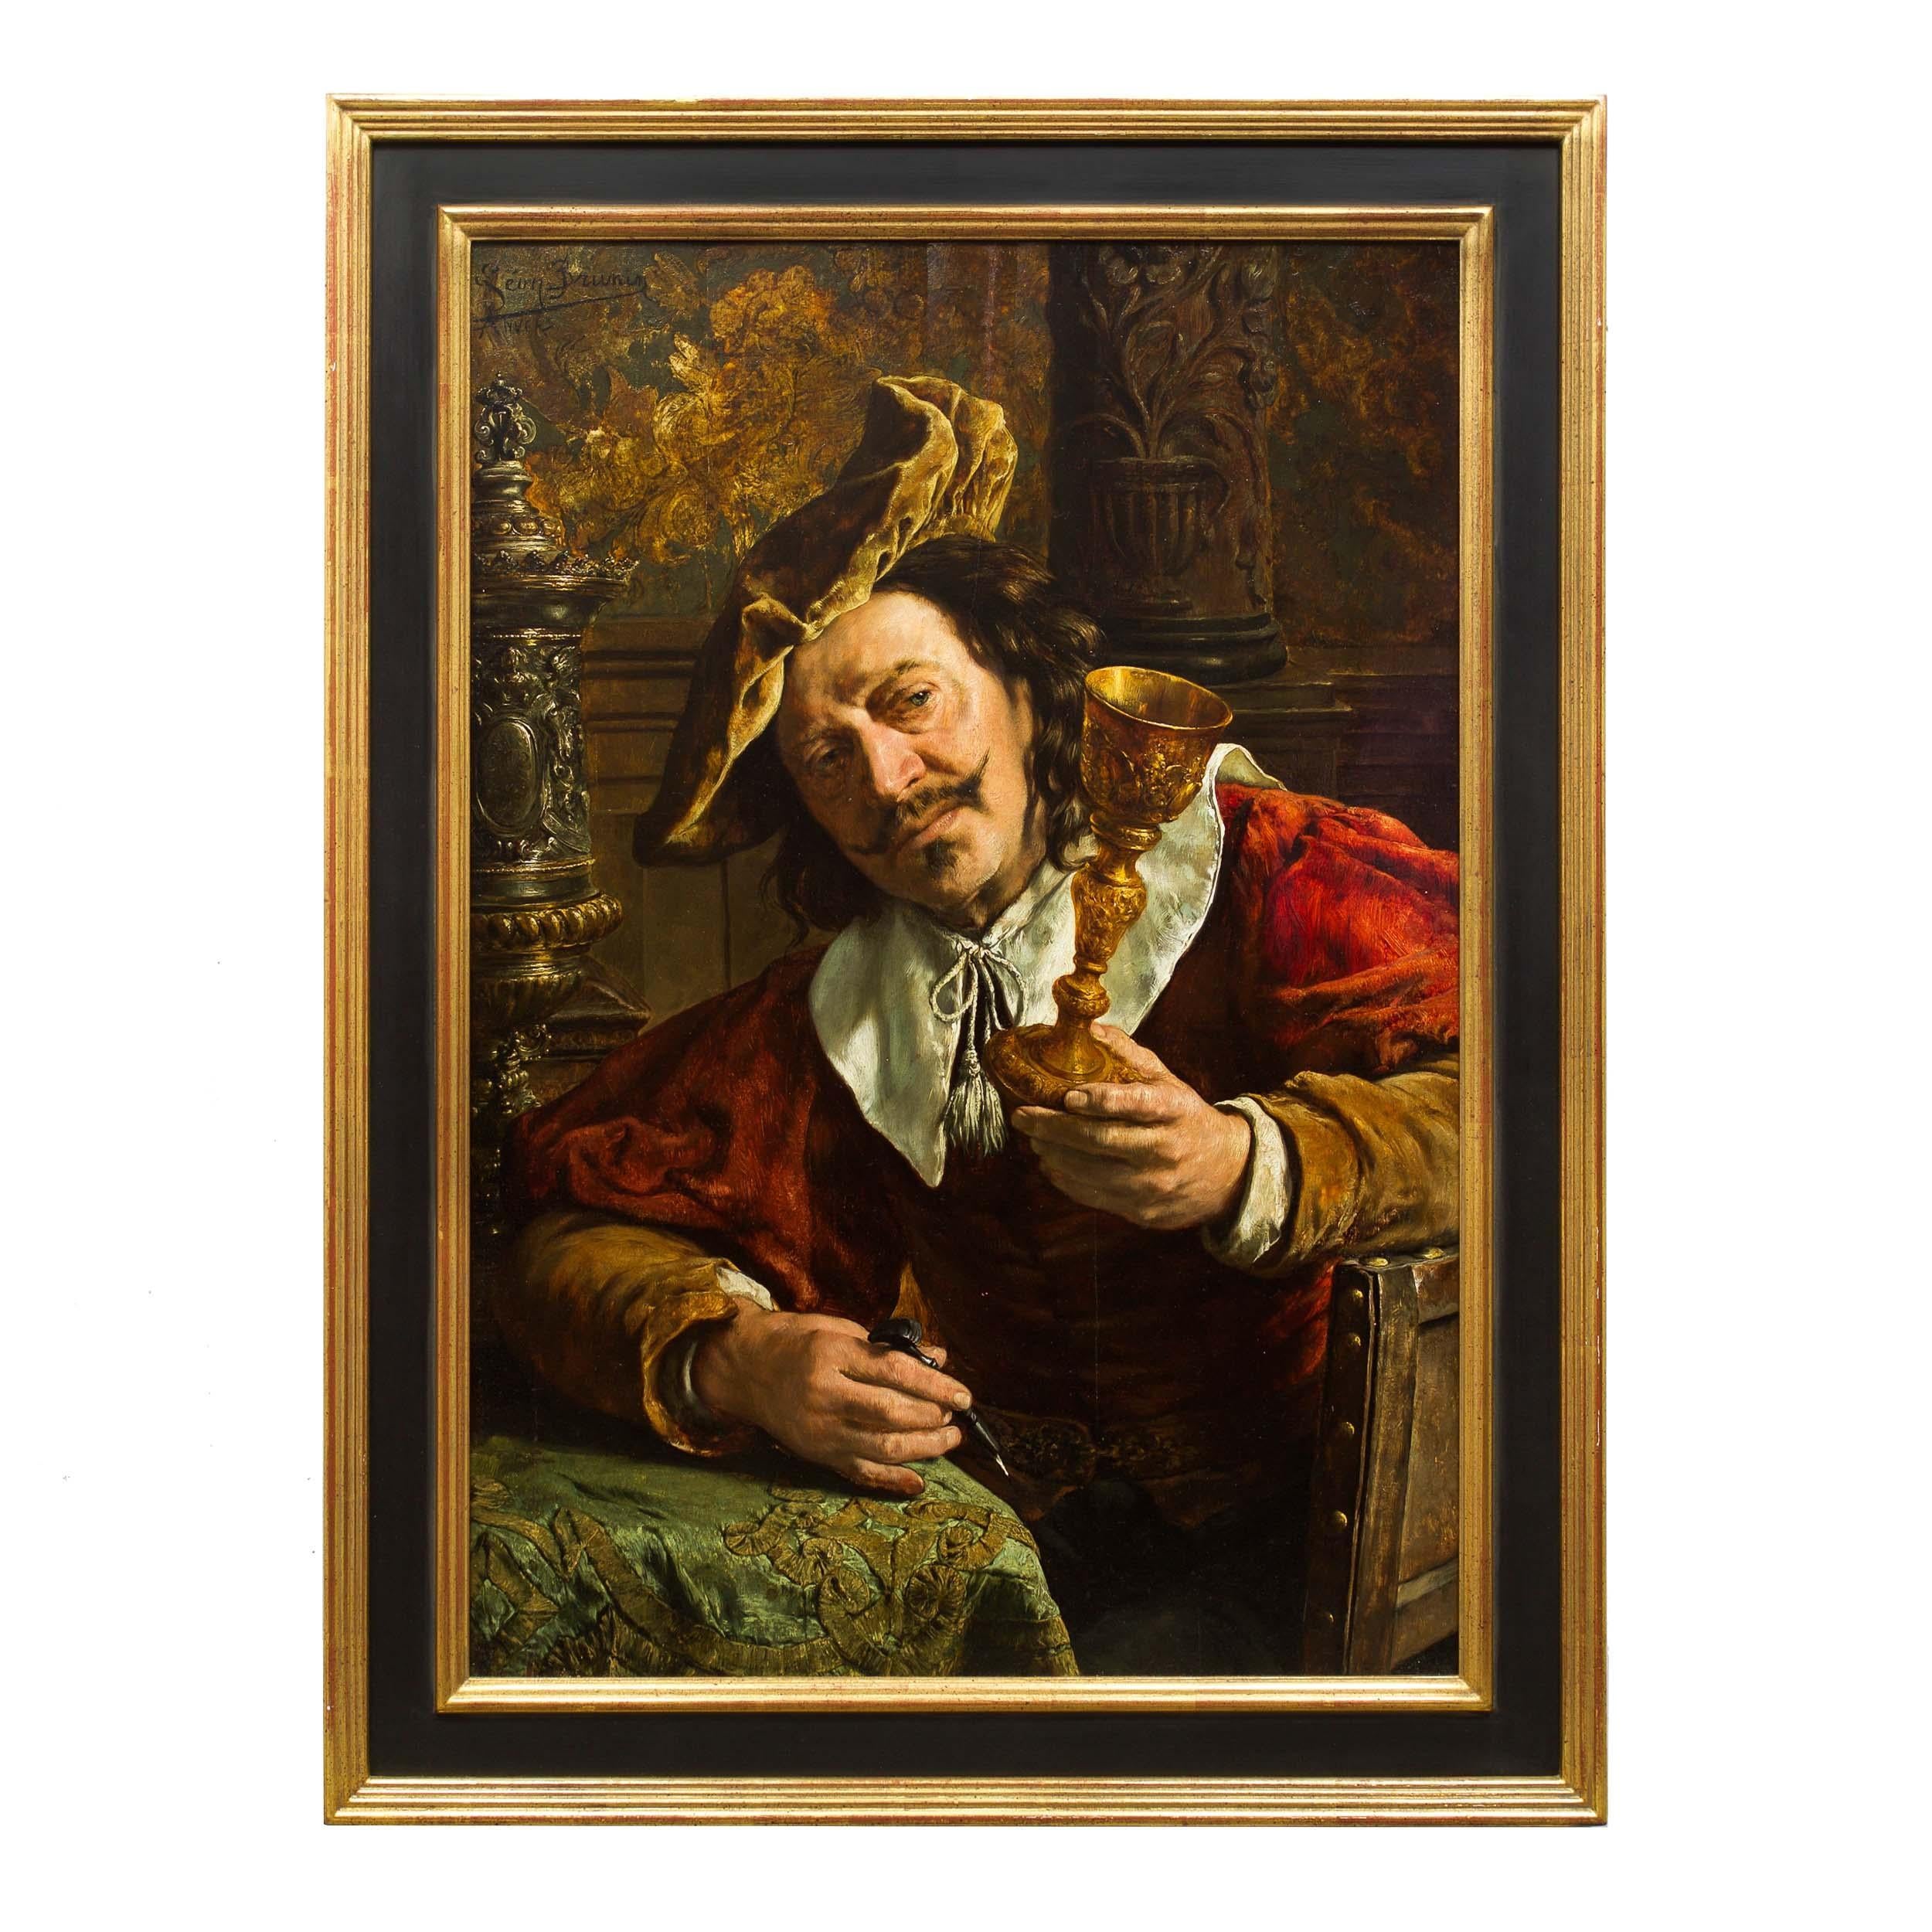 The present scene is a vivid and dramatic depiction of a silversmith holding in his hand a gilded chalice while a very large silver vessel rests on a stand behind him. Clearly a wealthy man with a careful eye for his garment and the design of the